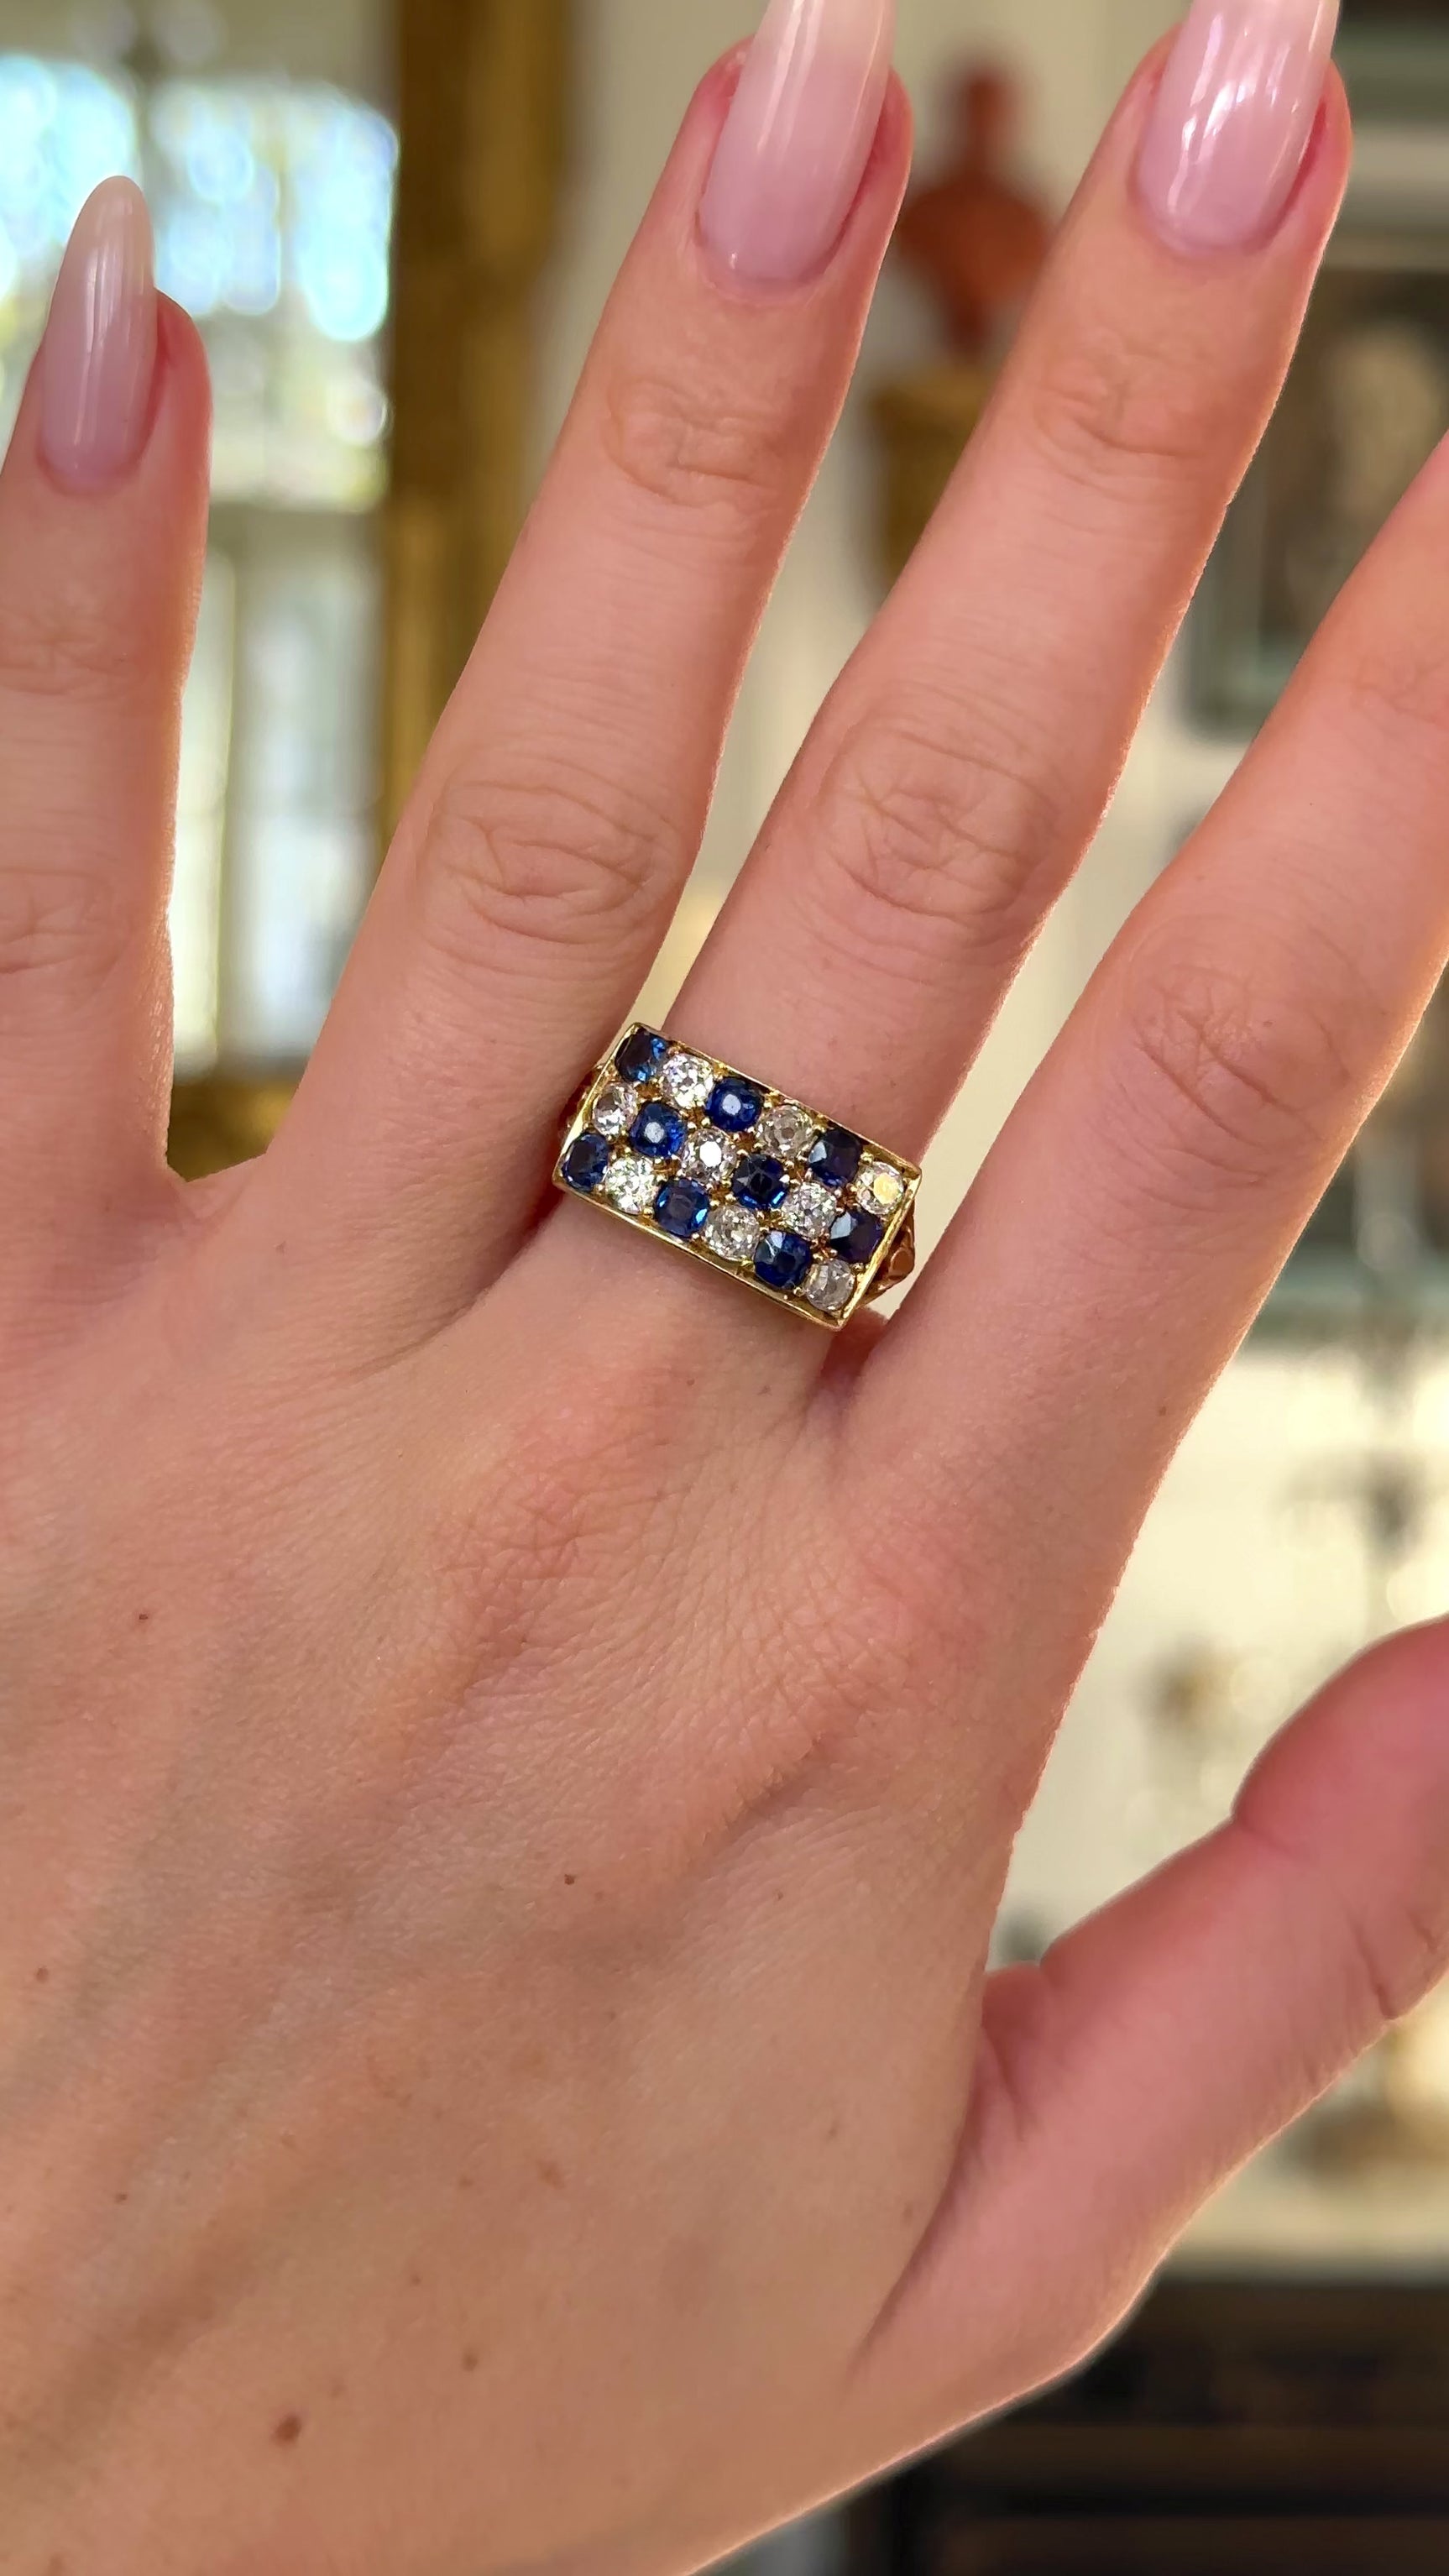 Sapphire and diamond checkerboard ring worn on hand and moved around to give perspective. 